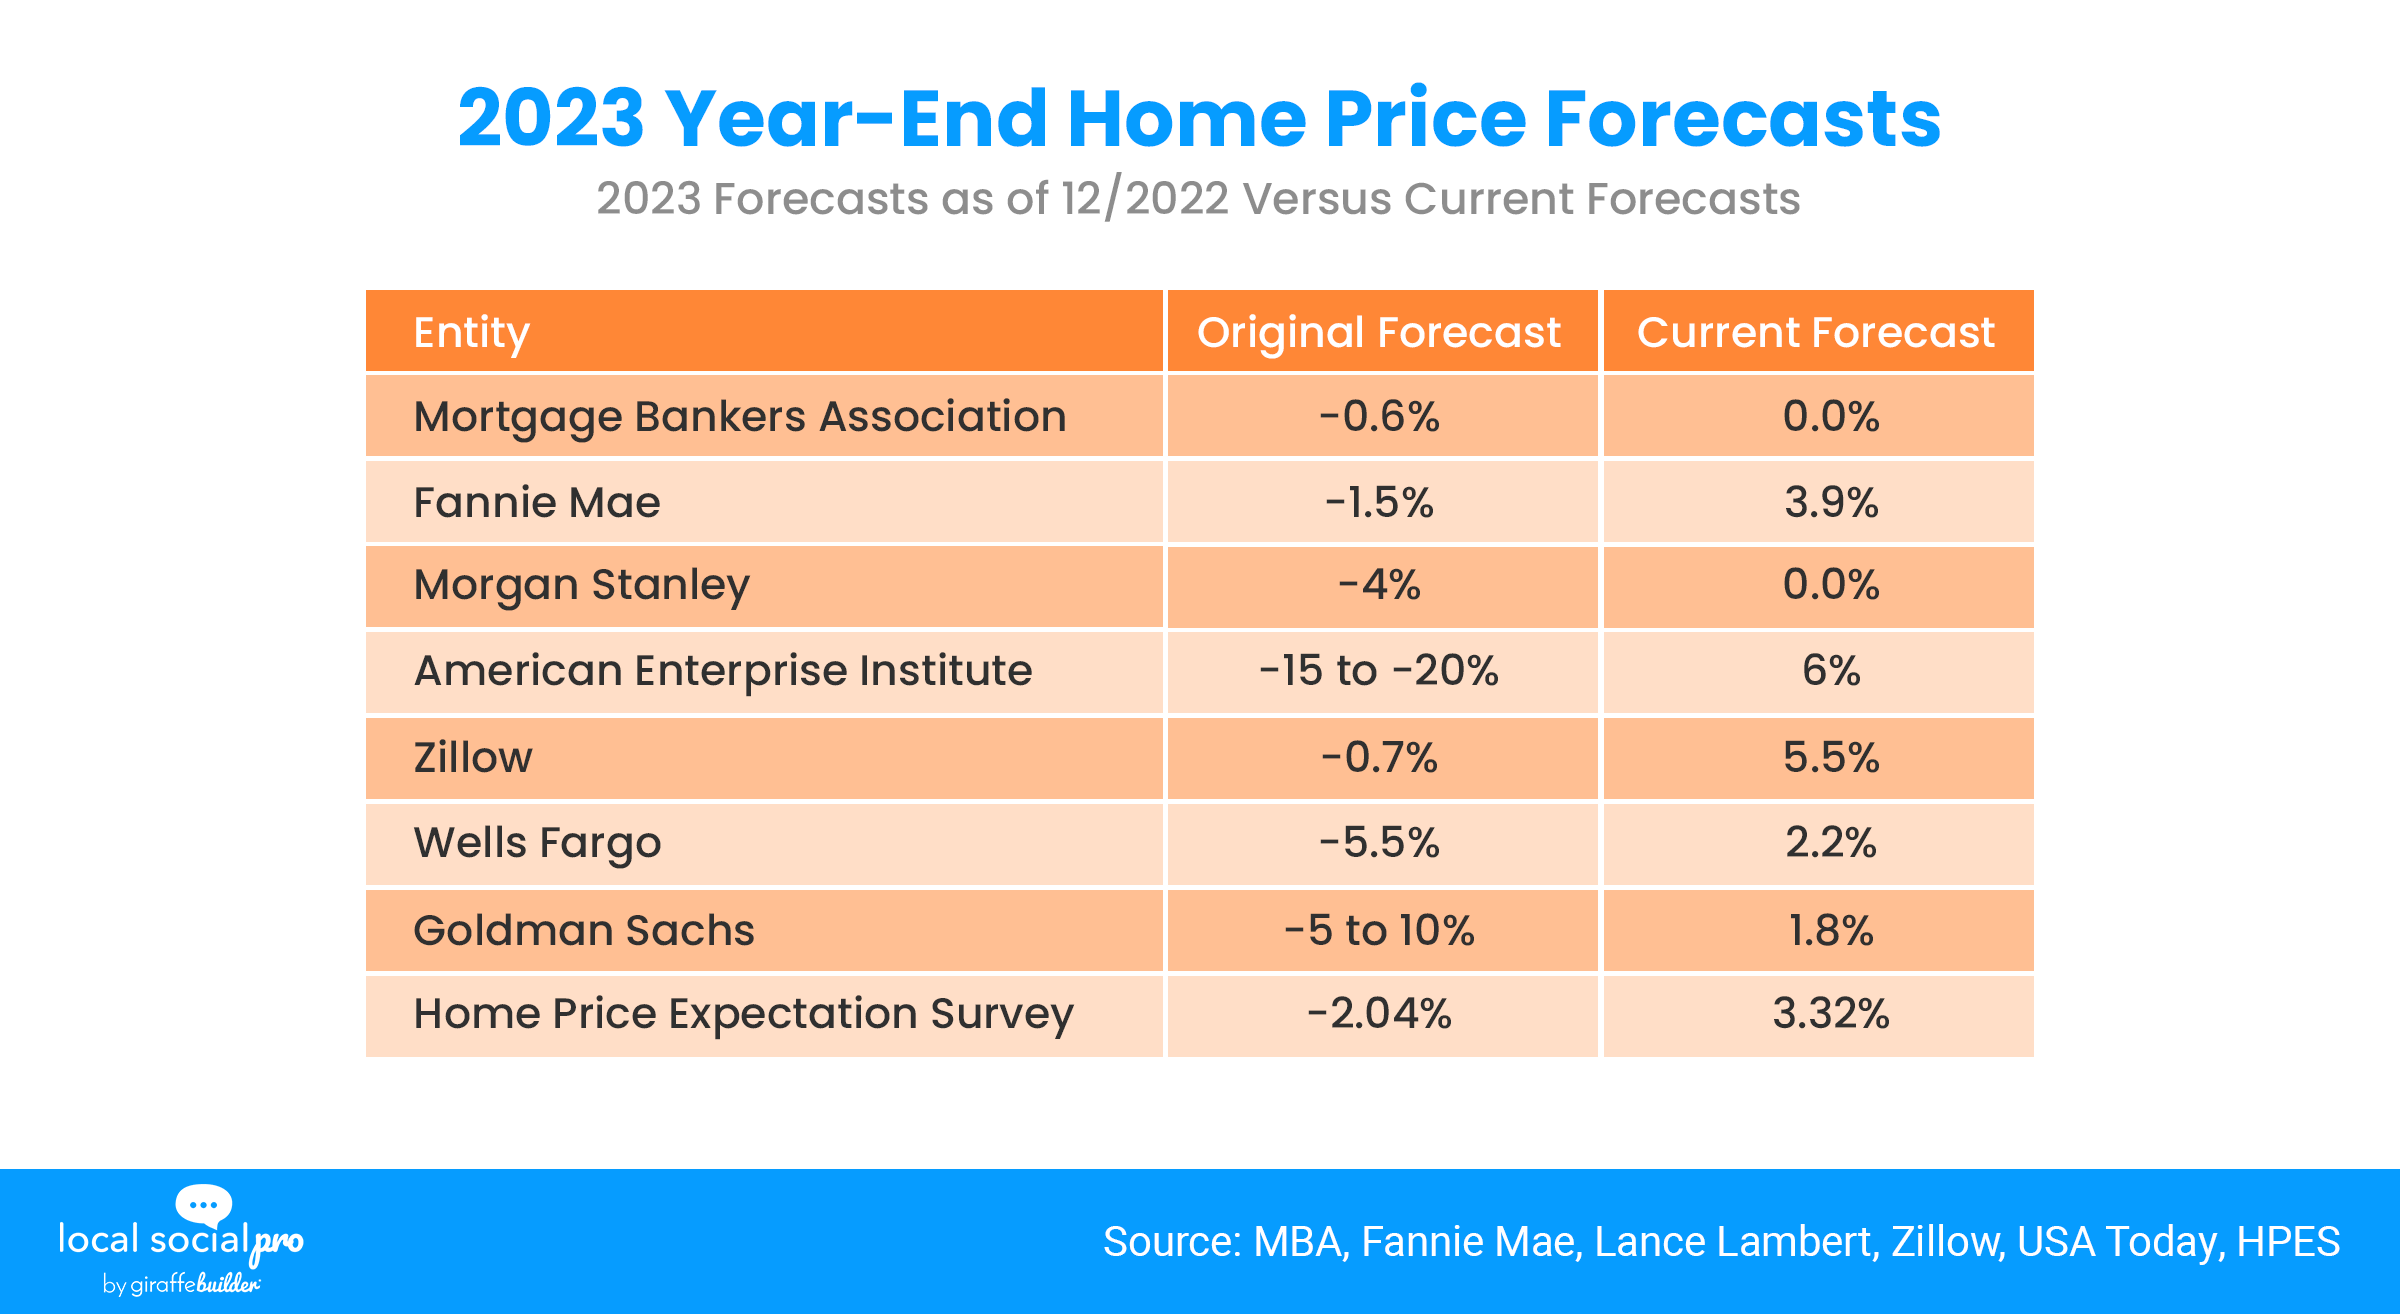 2023 Year-End Home Price Forecasts